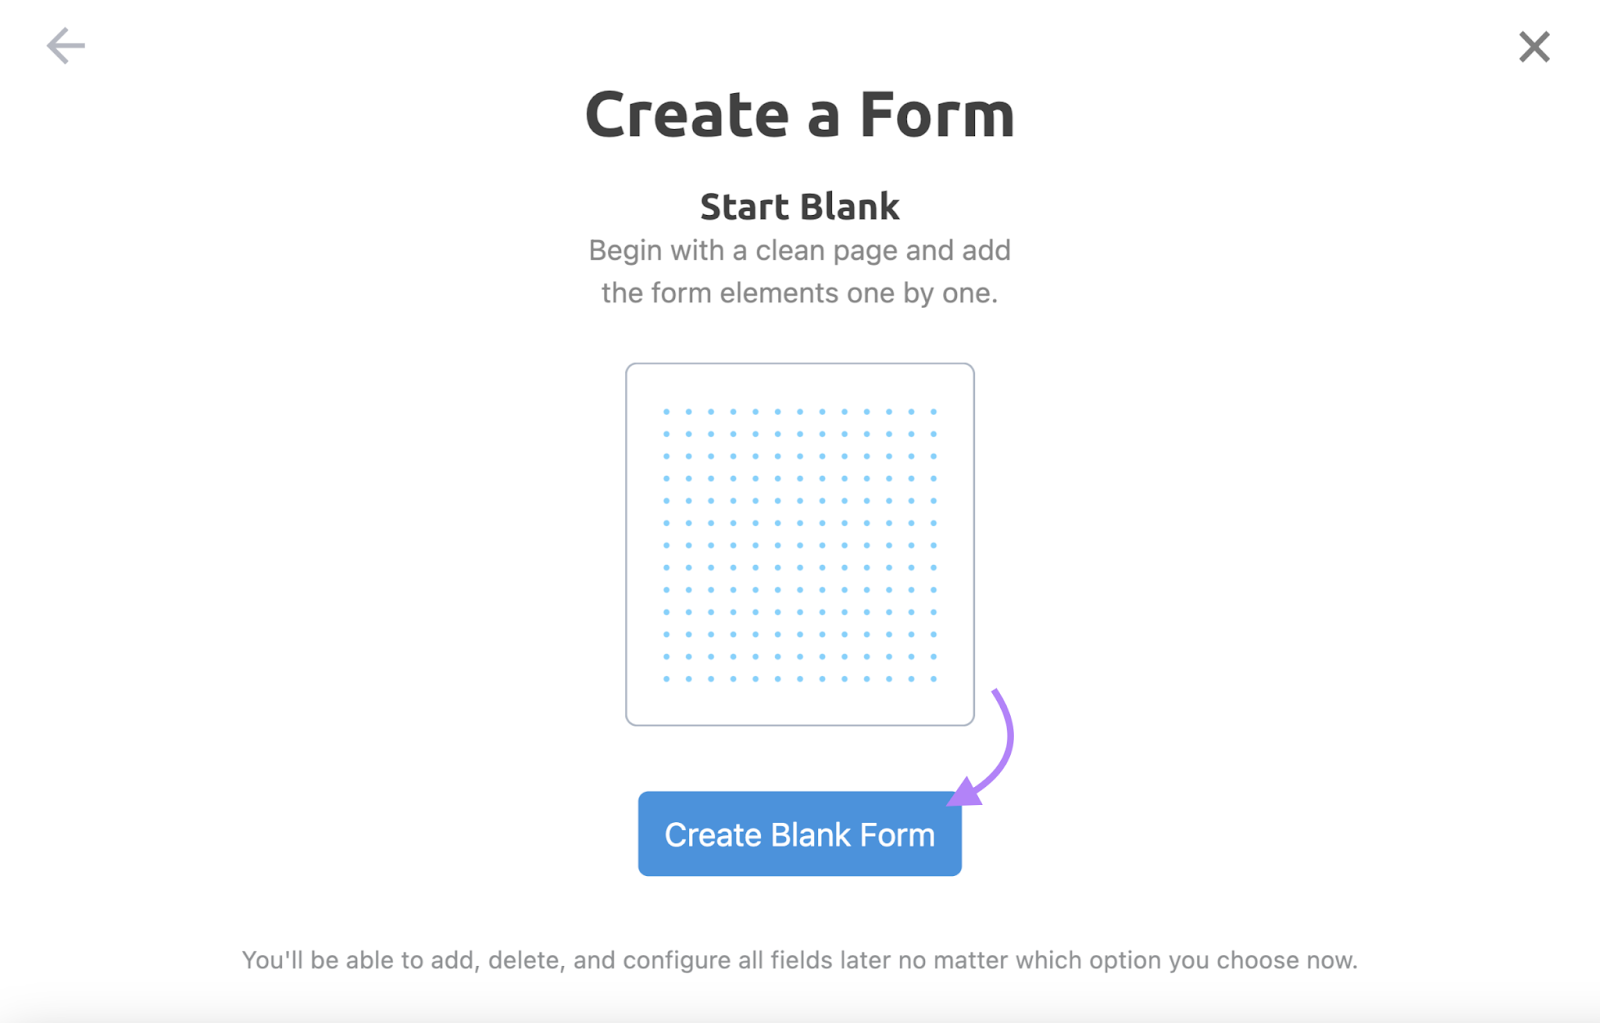 "Create Blank Form" button in Lead Generation Forms app